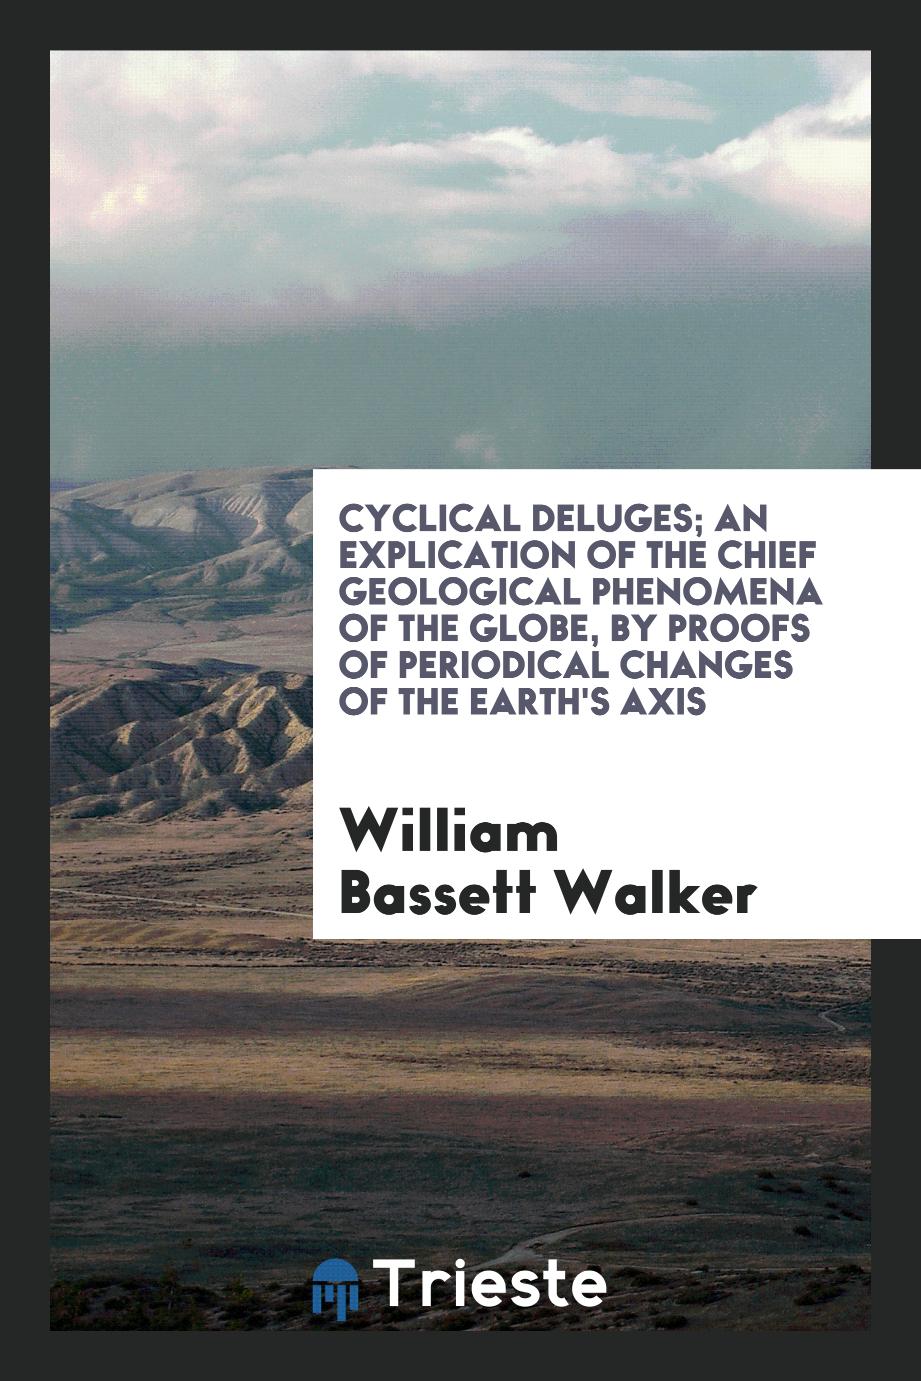 Cyclical Deluges; an Explication of the Chief Geological Phenomena of the Globe, by Proofs of Periodical Changes of the Earth's Axis